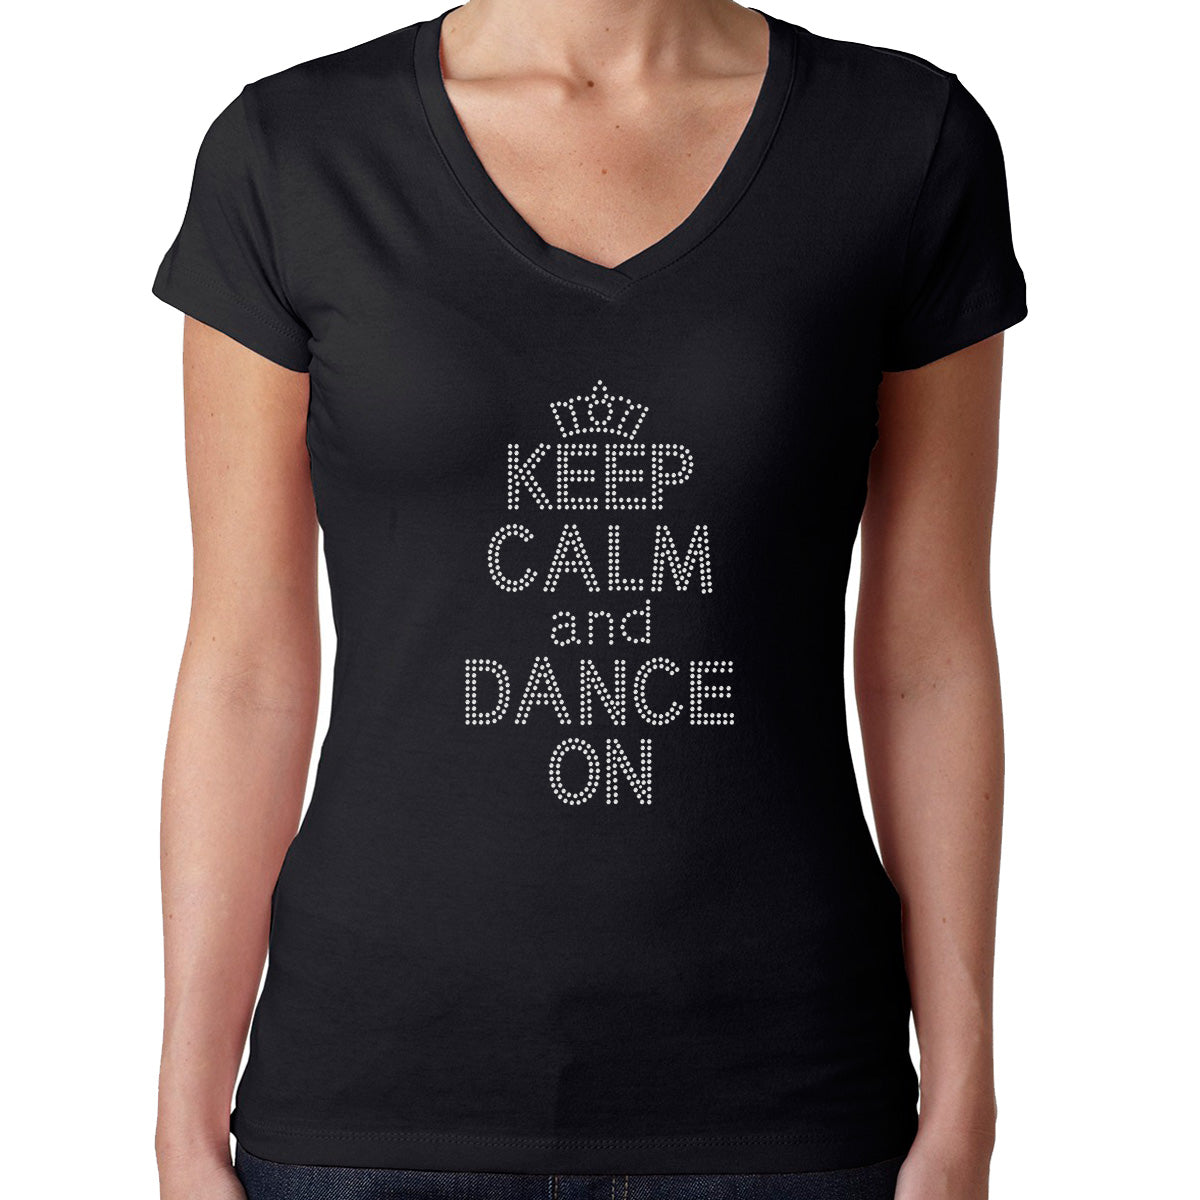 Womens T-Shirt Bling Black Fitted Tee Keep Calm Dance On Crown